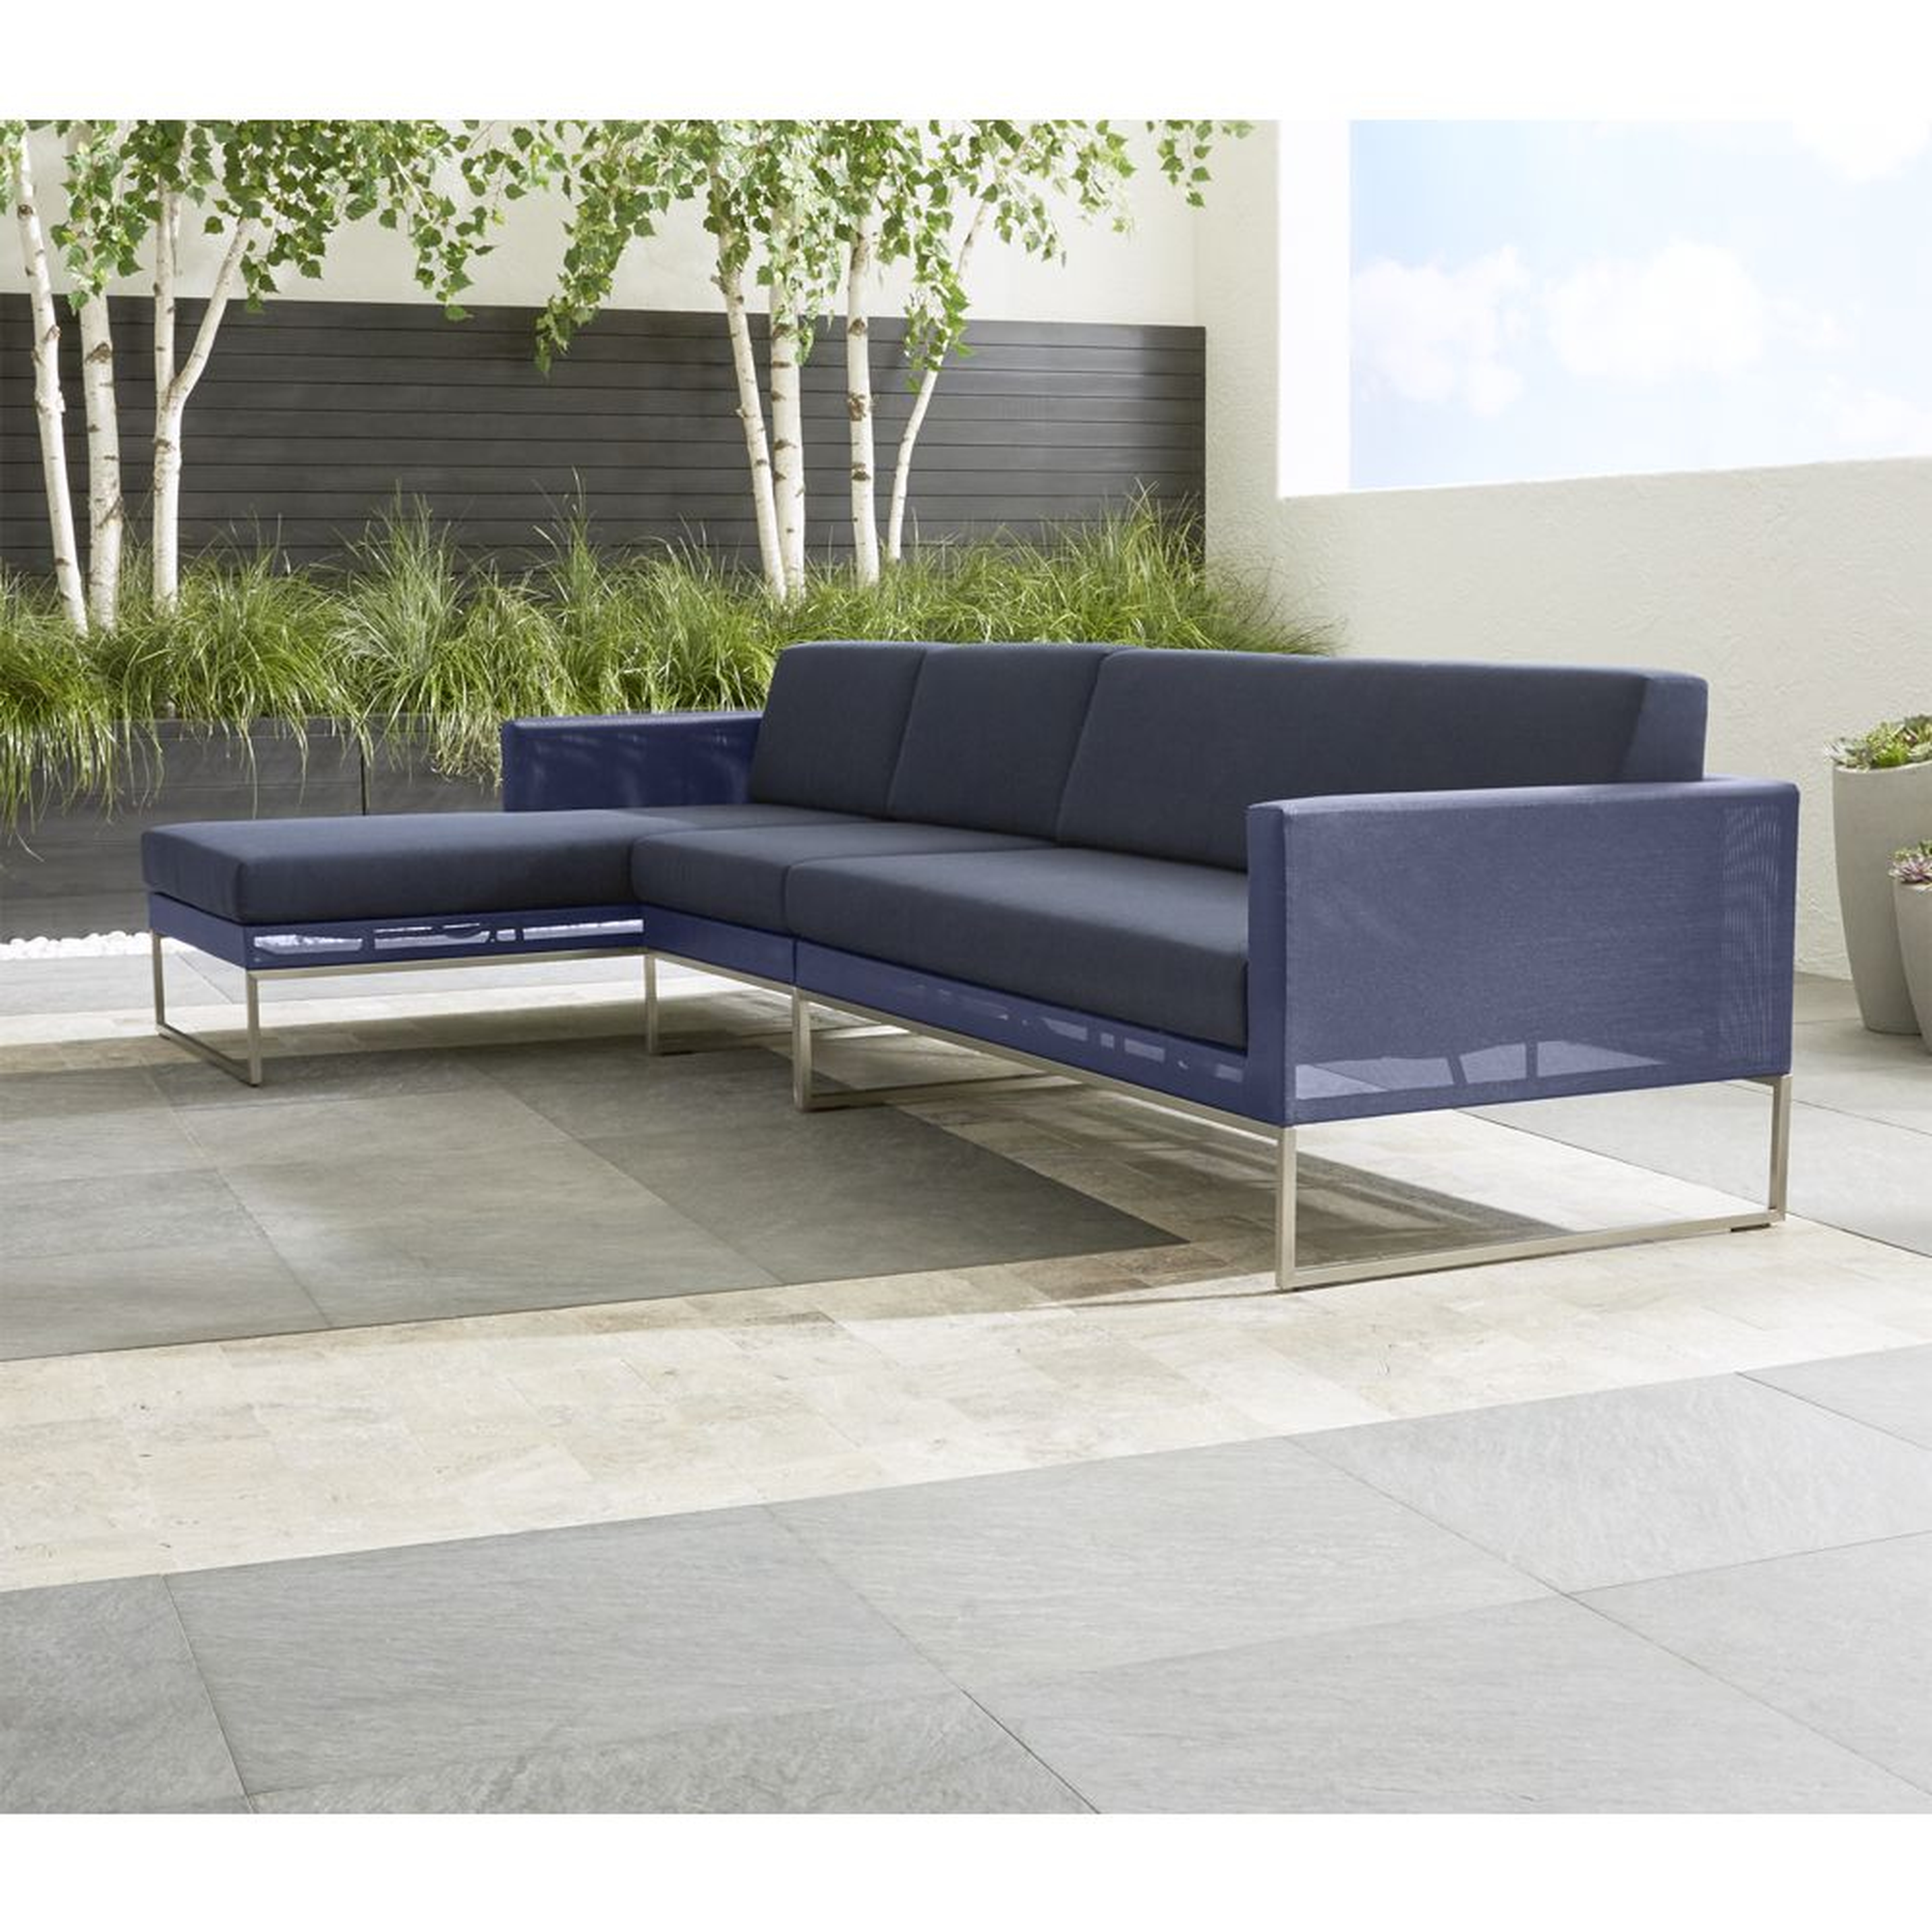 Dune 3-Piece Navy Left-Arm Chaise Outdoor Sectional Sofa with Sunbrella ® Cushions - Crate and Barrel